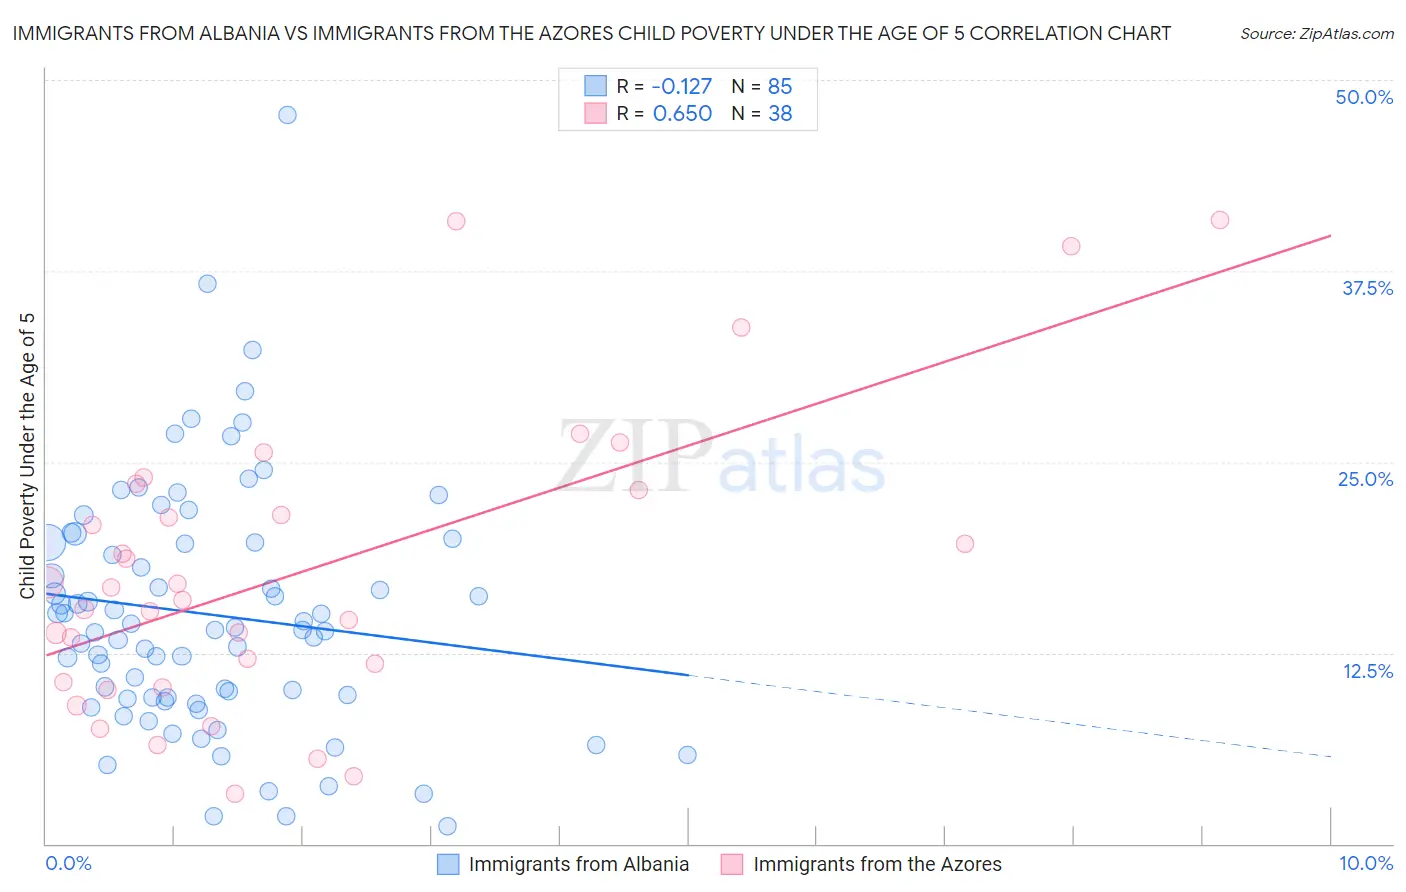 Immigrants from Albania vs Immigrants from the Azores Child Poverty Under the Age of 5